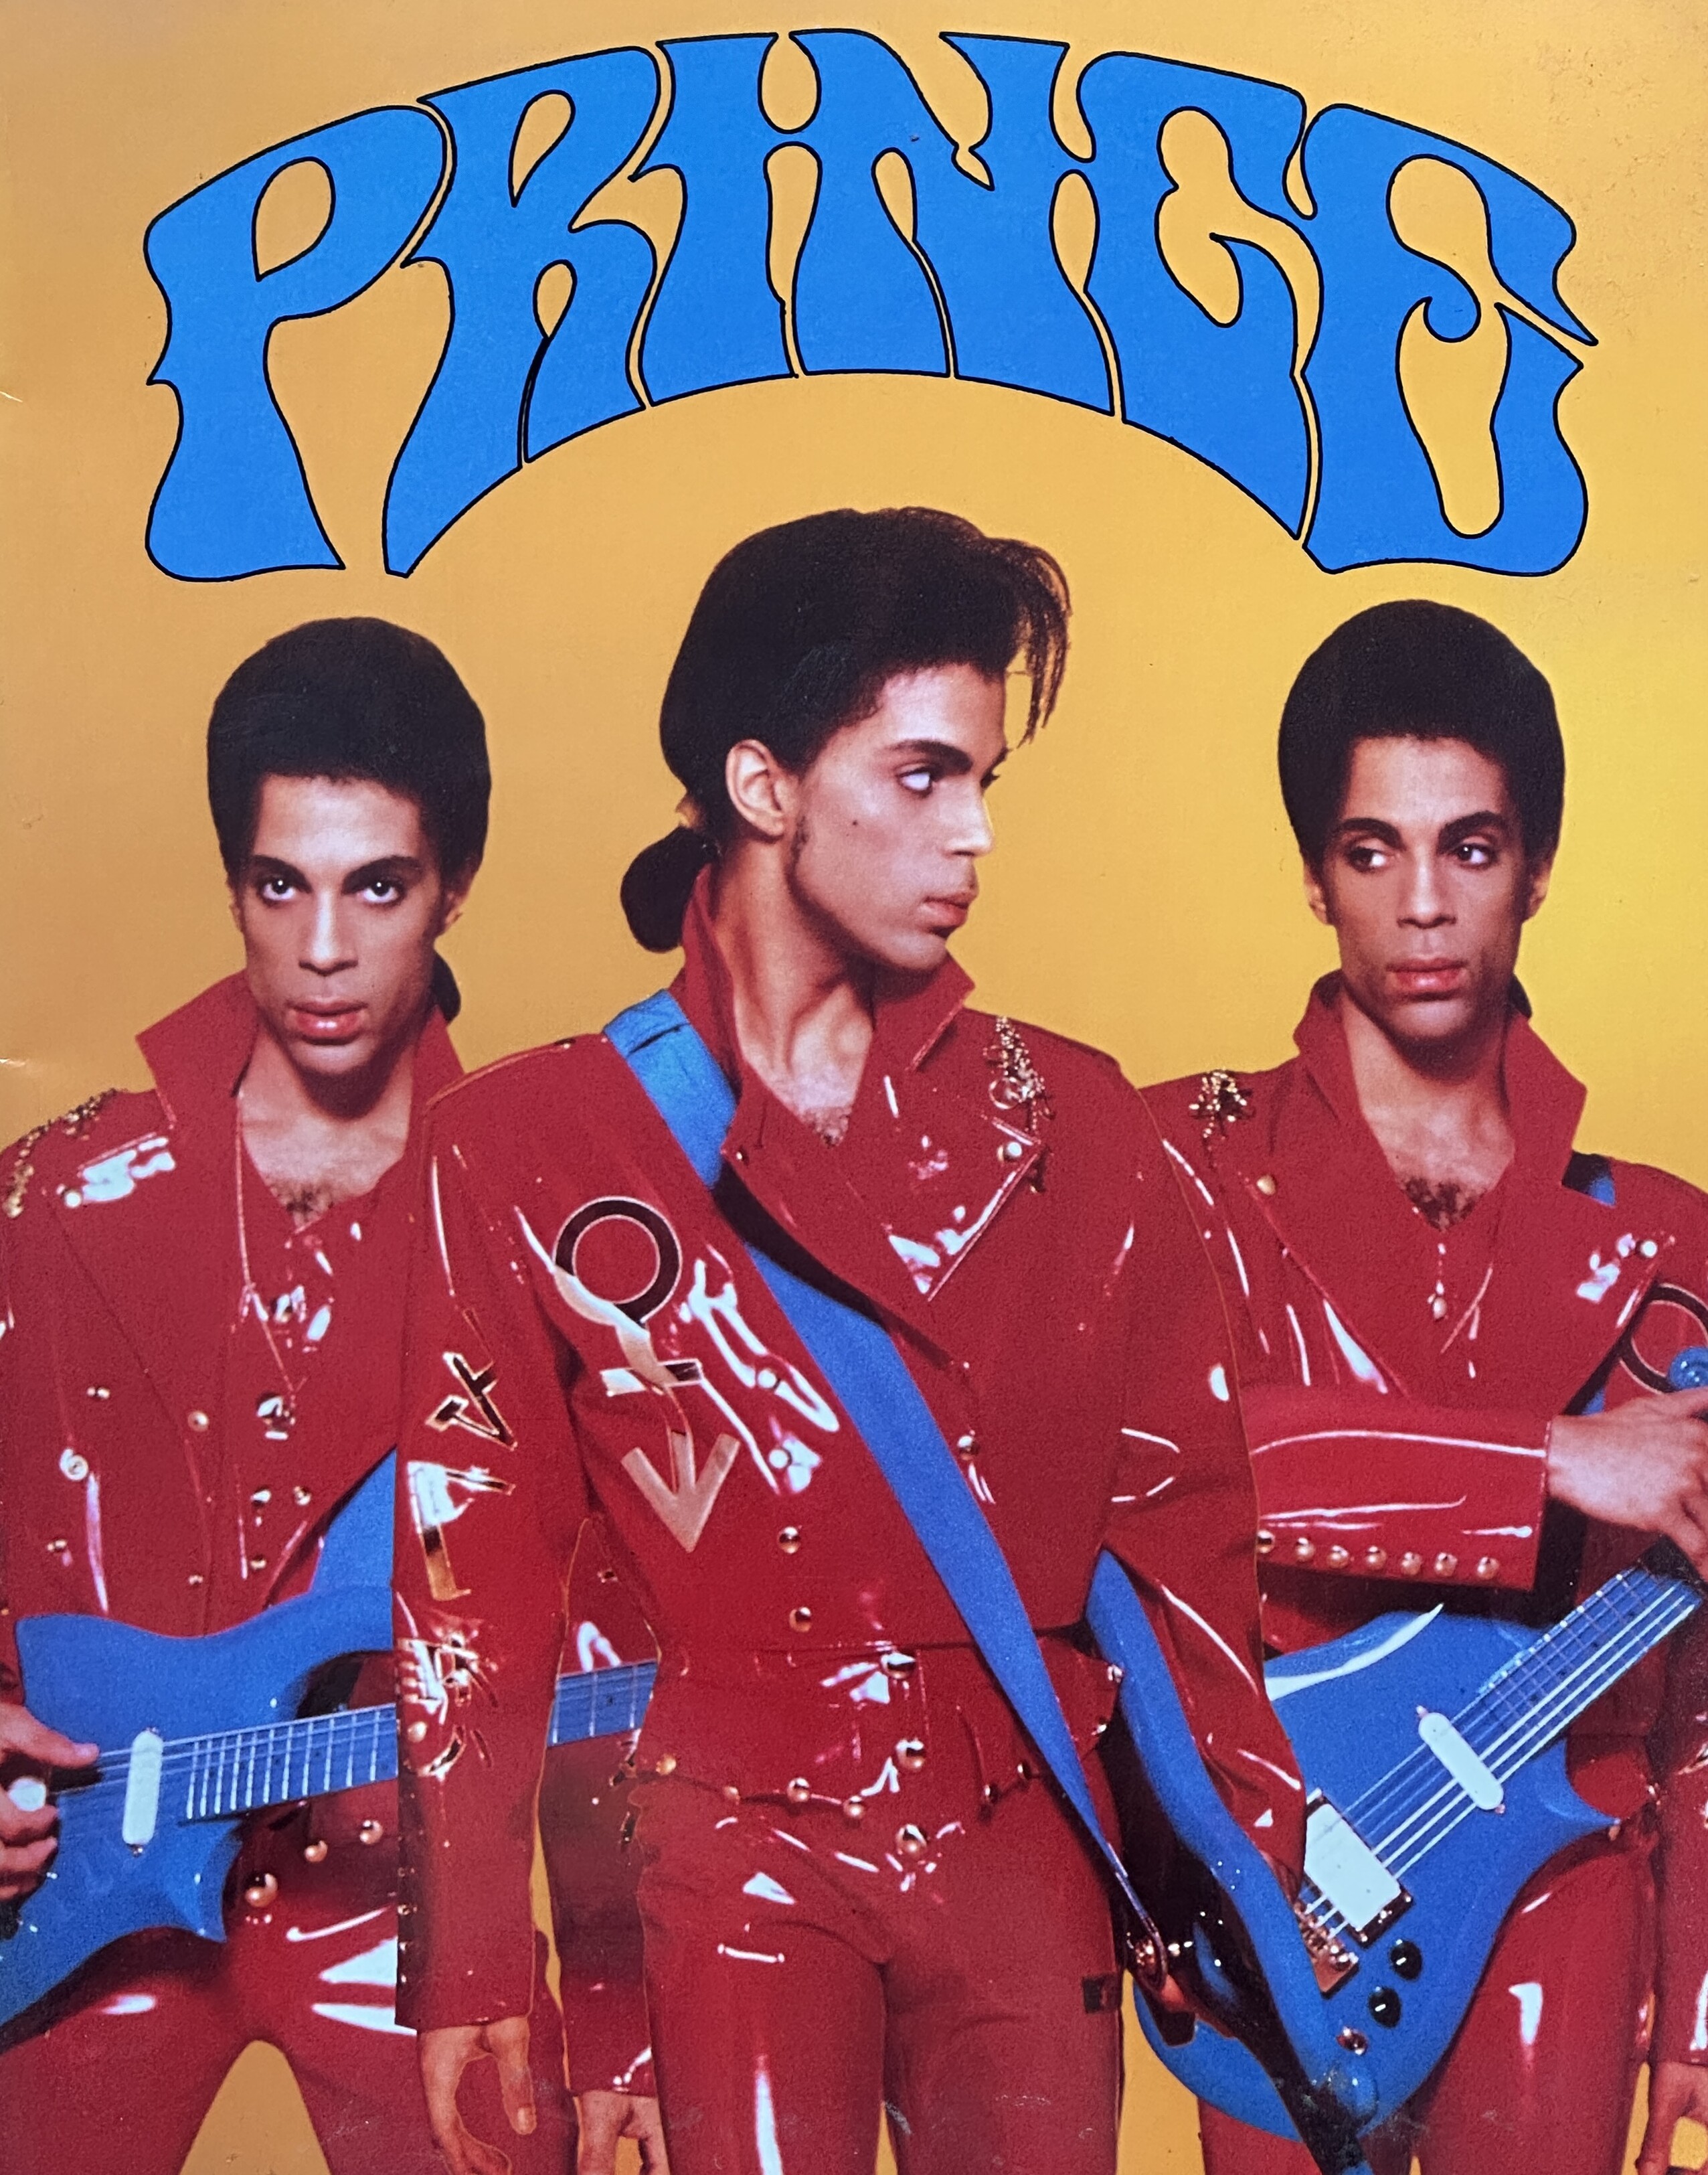 Prince magazine cover with theee shots of Prince in a red suit and blue guitar